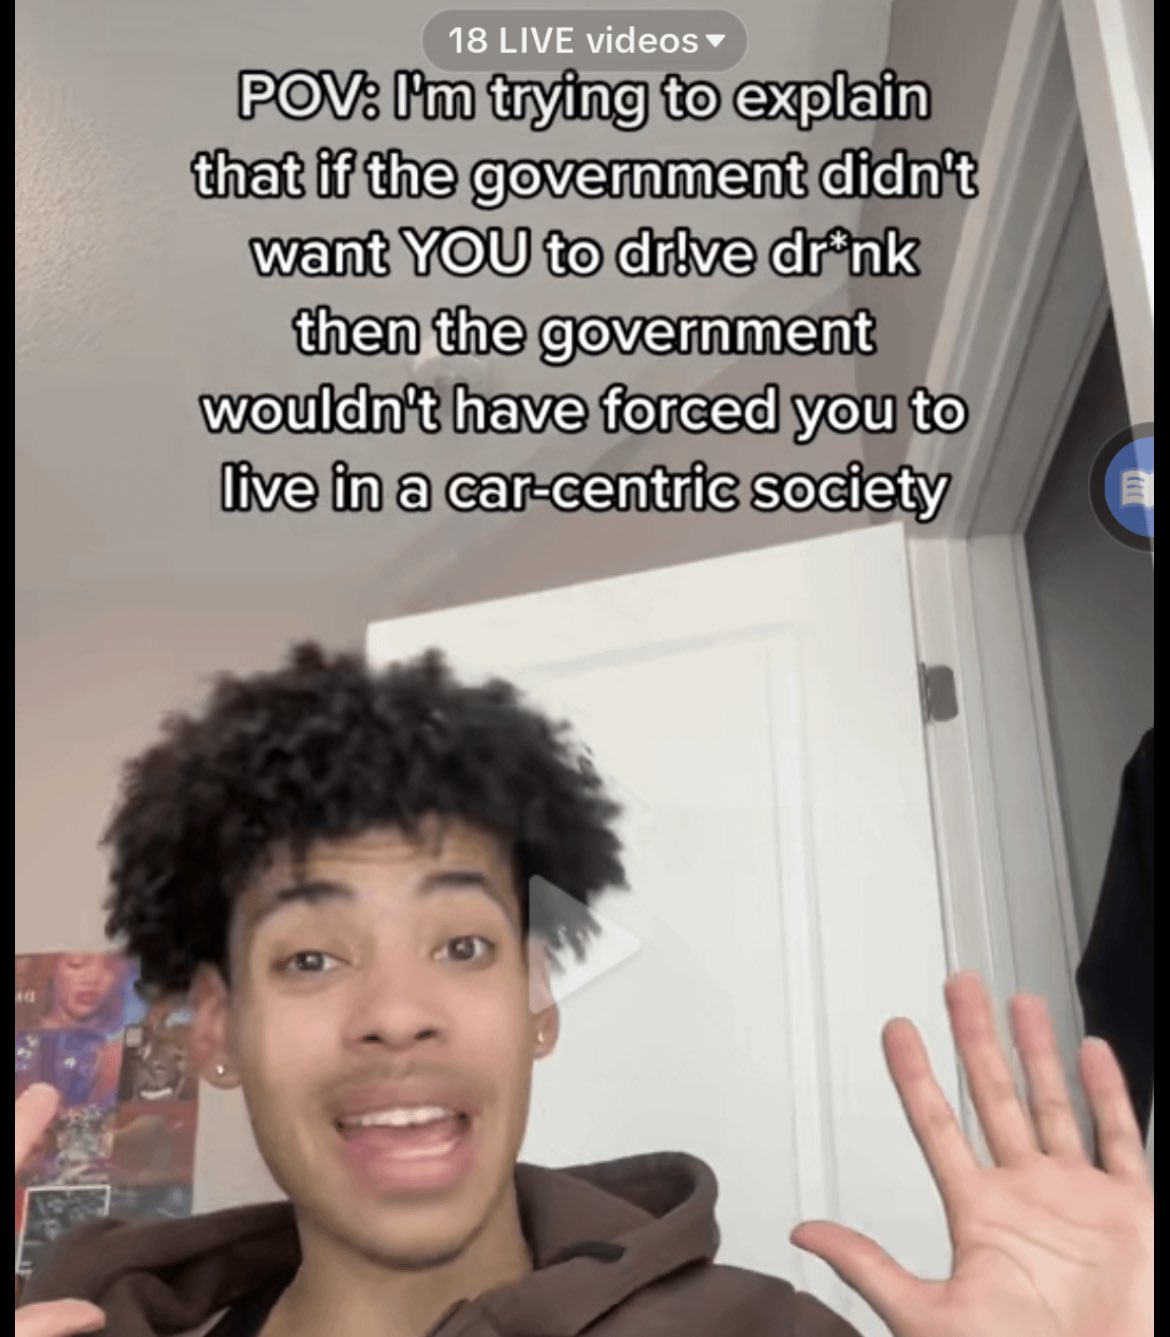 wild tiktok screenshots - hairstyle - 412 18 Live videos Pov I'm trying to explain that if the government didn't want You to drive drink then the government wouldn't have forced you to live in a carcentric society 100 E